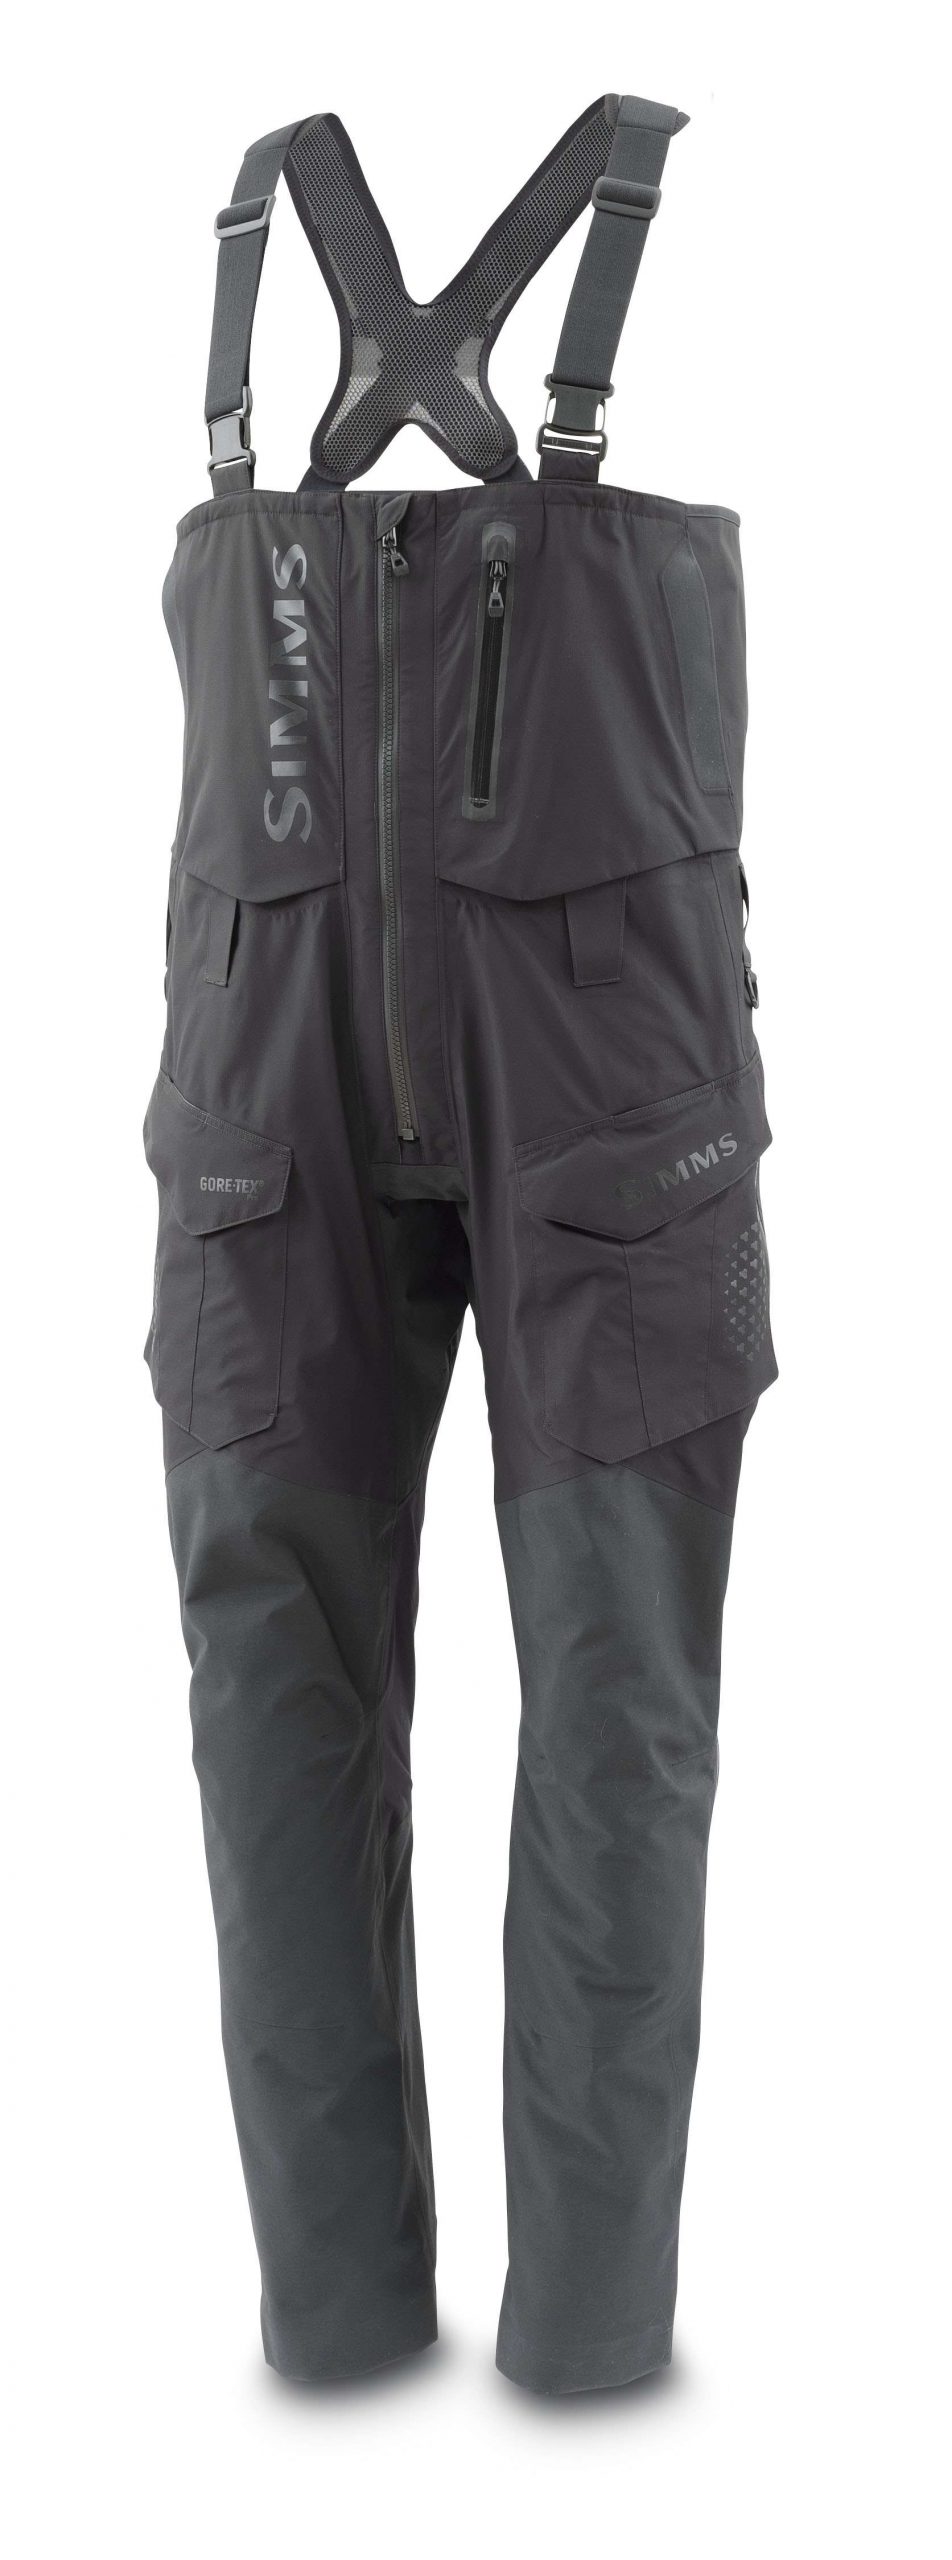 <b>Simms</b><br>	ProDry Bib<br>				When monsooning weather calls for stay-dry solutions, Simmsâ 25 percent lighter GORE-TEX Pro Shell Bib delivers enhanced stowabailty coupled with advanced waterproof, durable performance. Large top-load thigh pockets include plier sleeves, and a zippered chest storage pocket is a safe-haven for smartphones, car keys, etc. A lower leg hem-lifter prevents cuff/heel drag on boat decks and full length, two-way leg zippers ventilate.